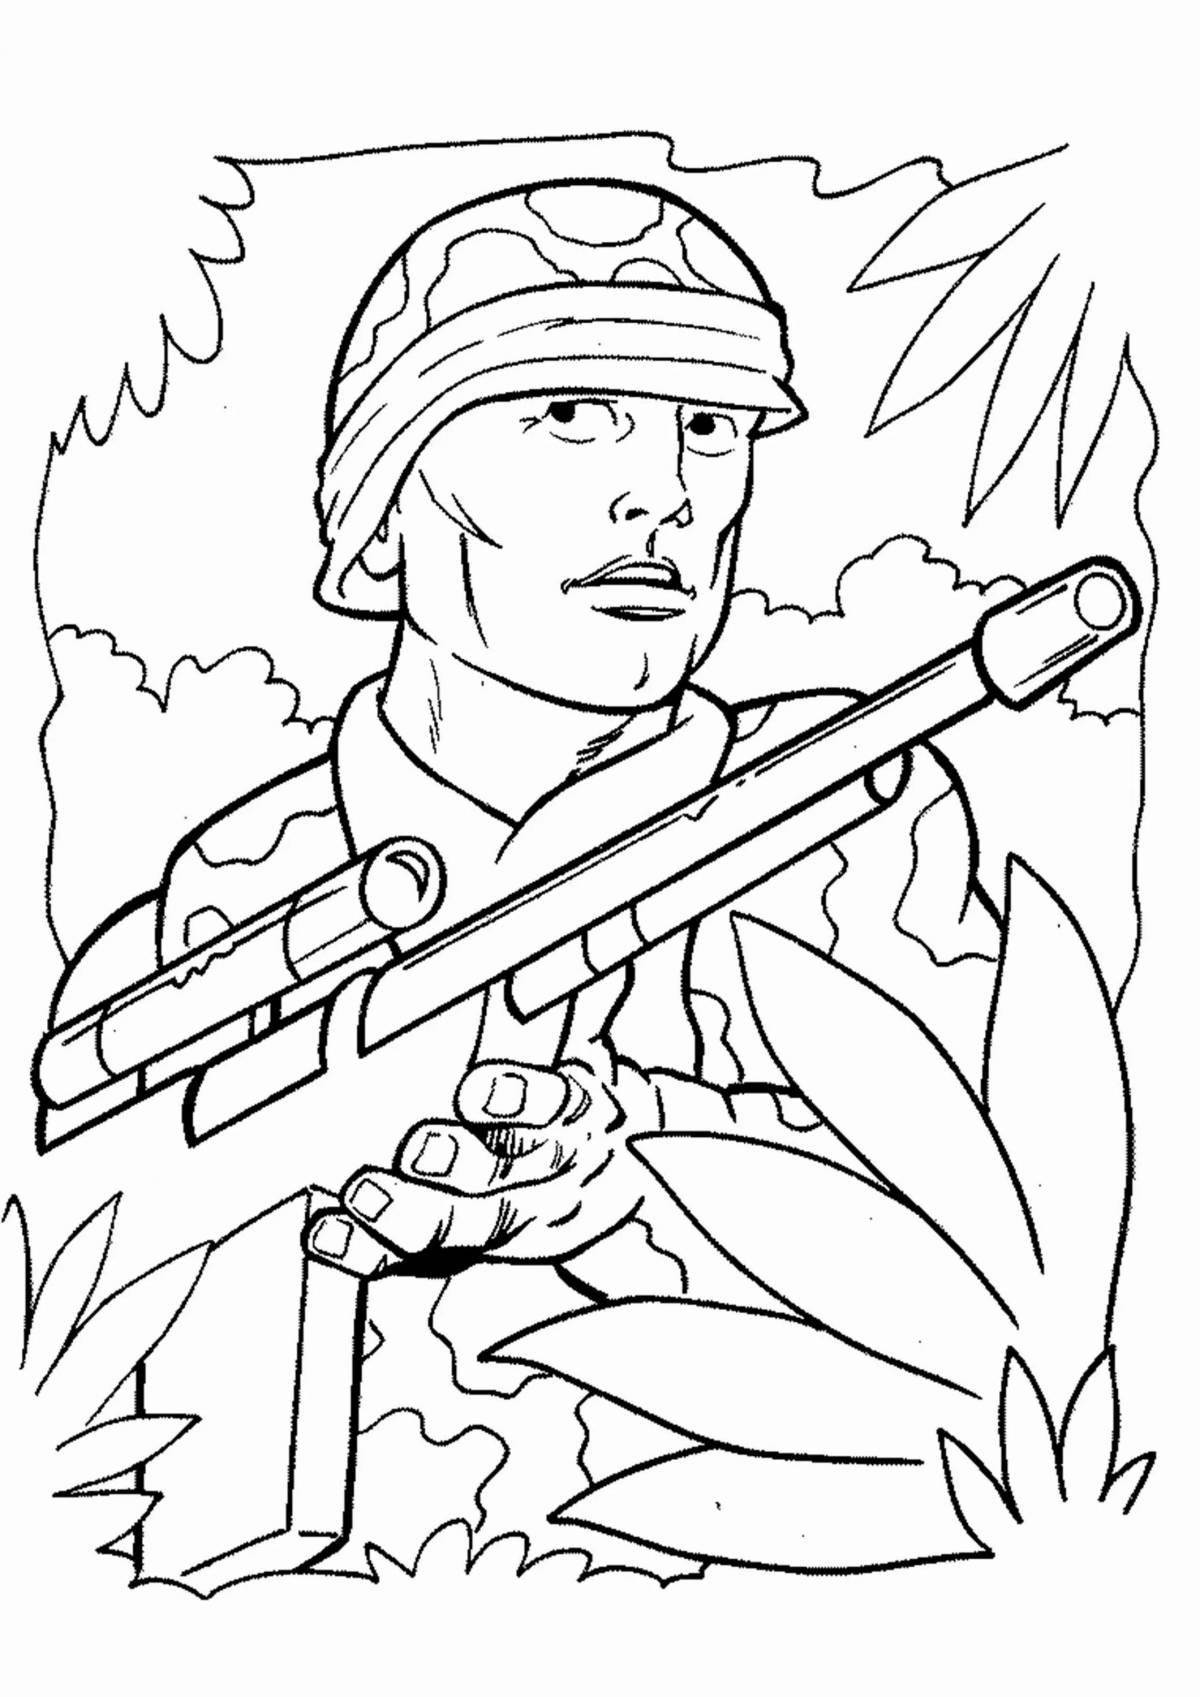 Coloring page glamor defender's day